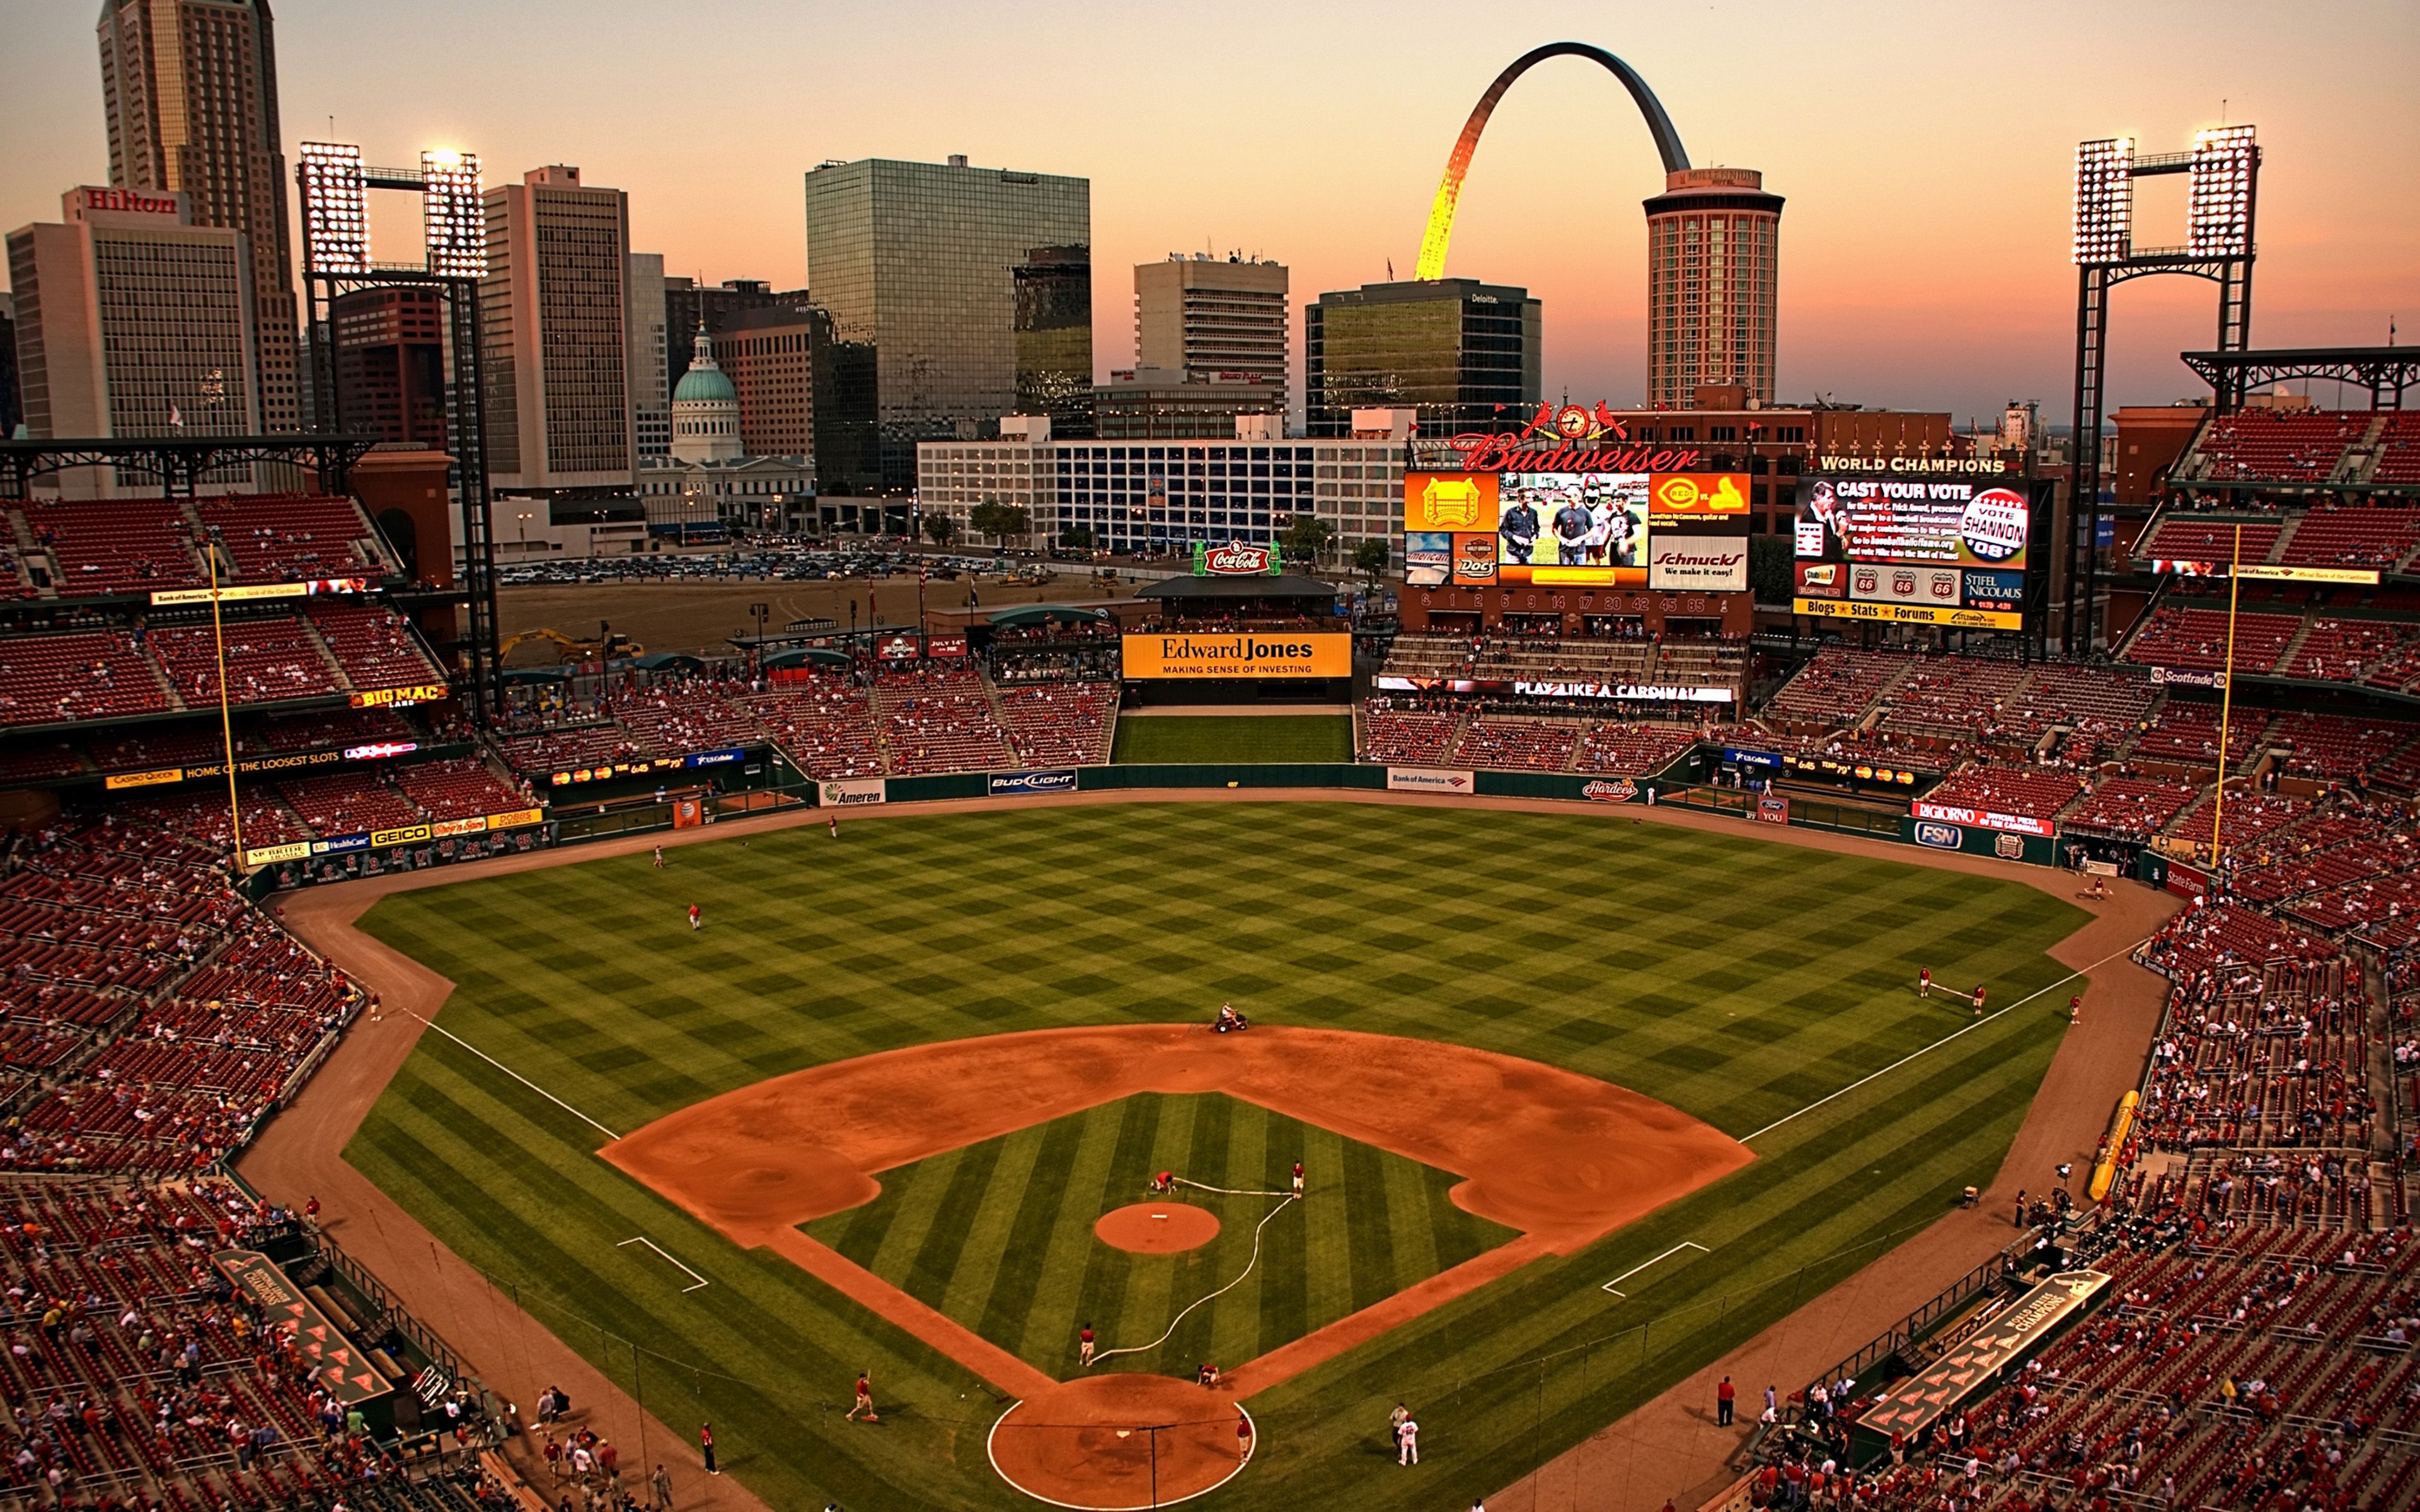 Pin by Art Adye on St. Louis Cardinals  St louis cardinals baseball, Stl  cardinals baseball, Baseball stadiums pictures